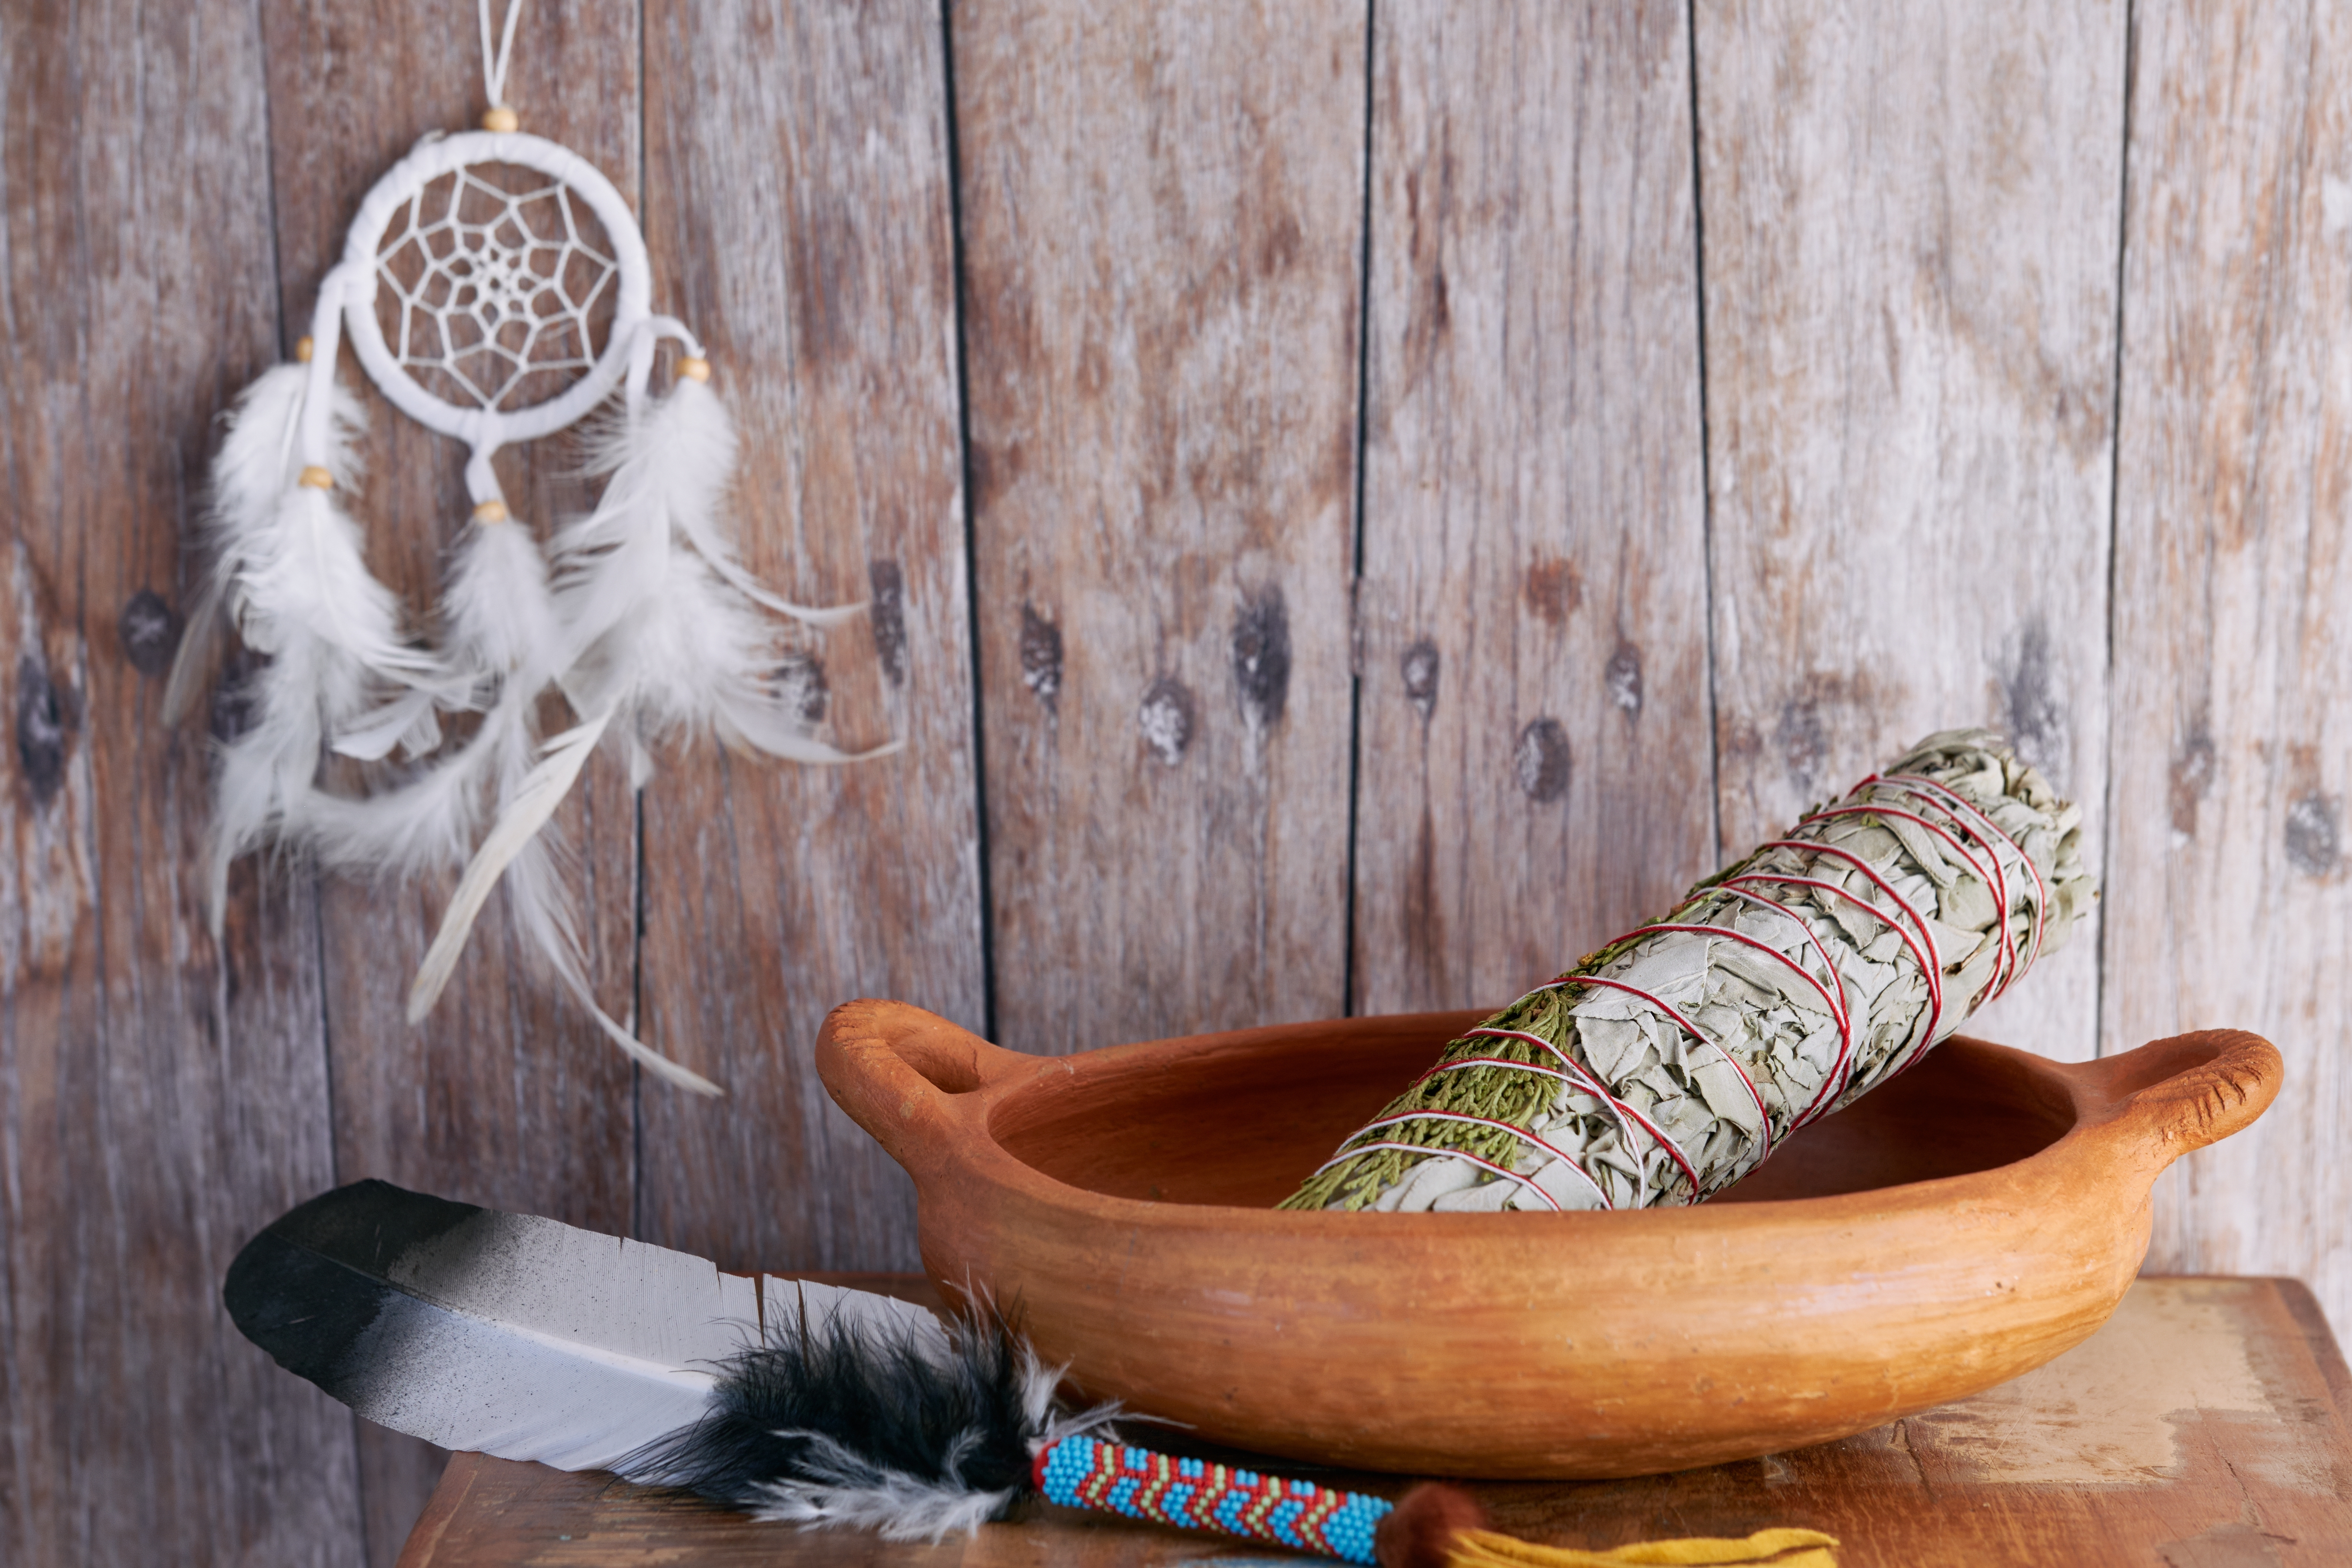 A smudge stick (bundle of dried white sage and juniper) in a clay bowl with a decorative feather to spread the smoke and a dreamcatcher in the background | Source: Shutterstock